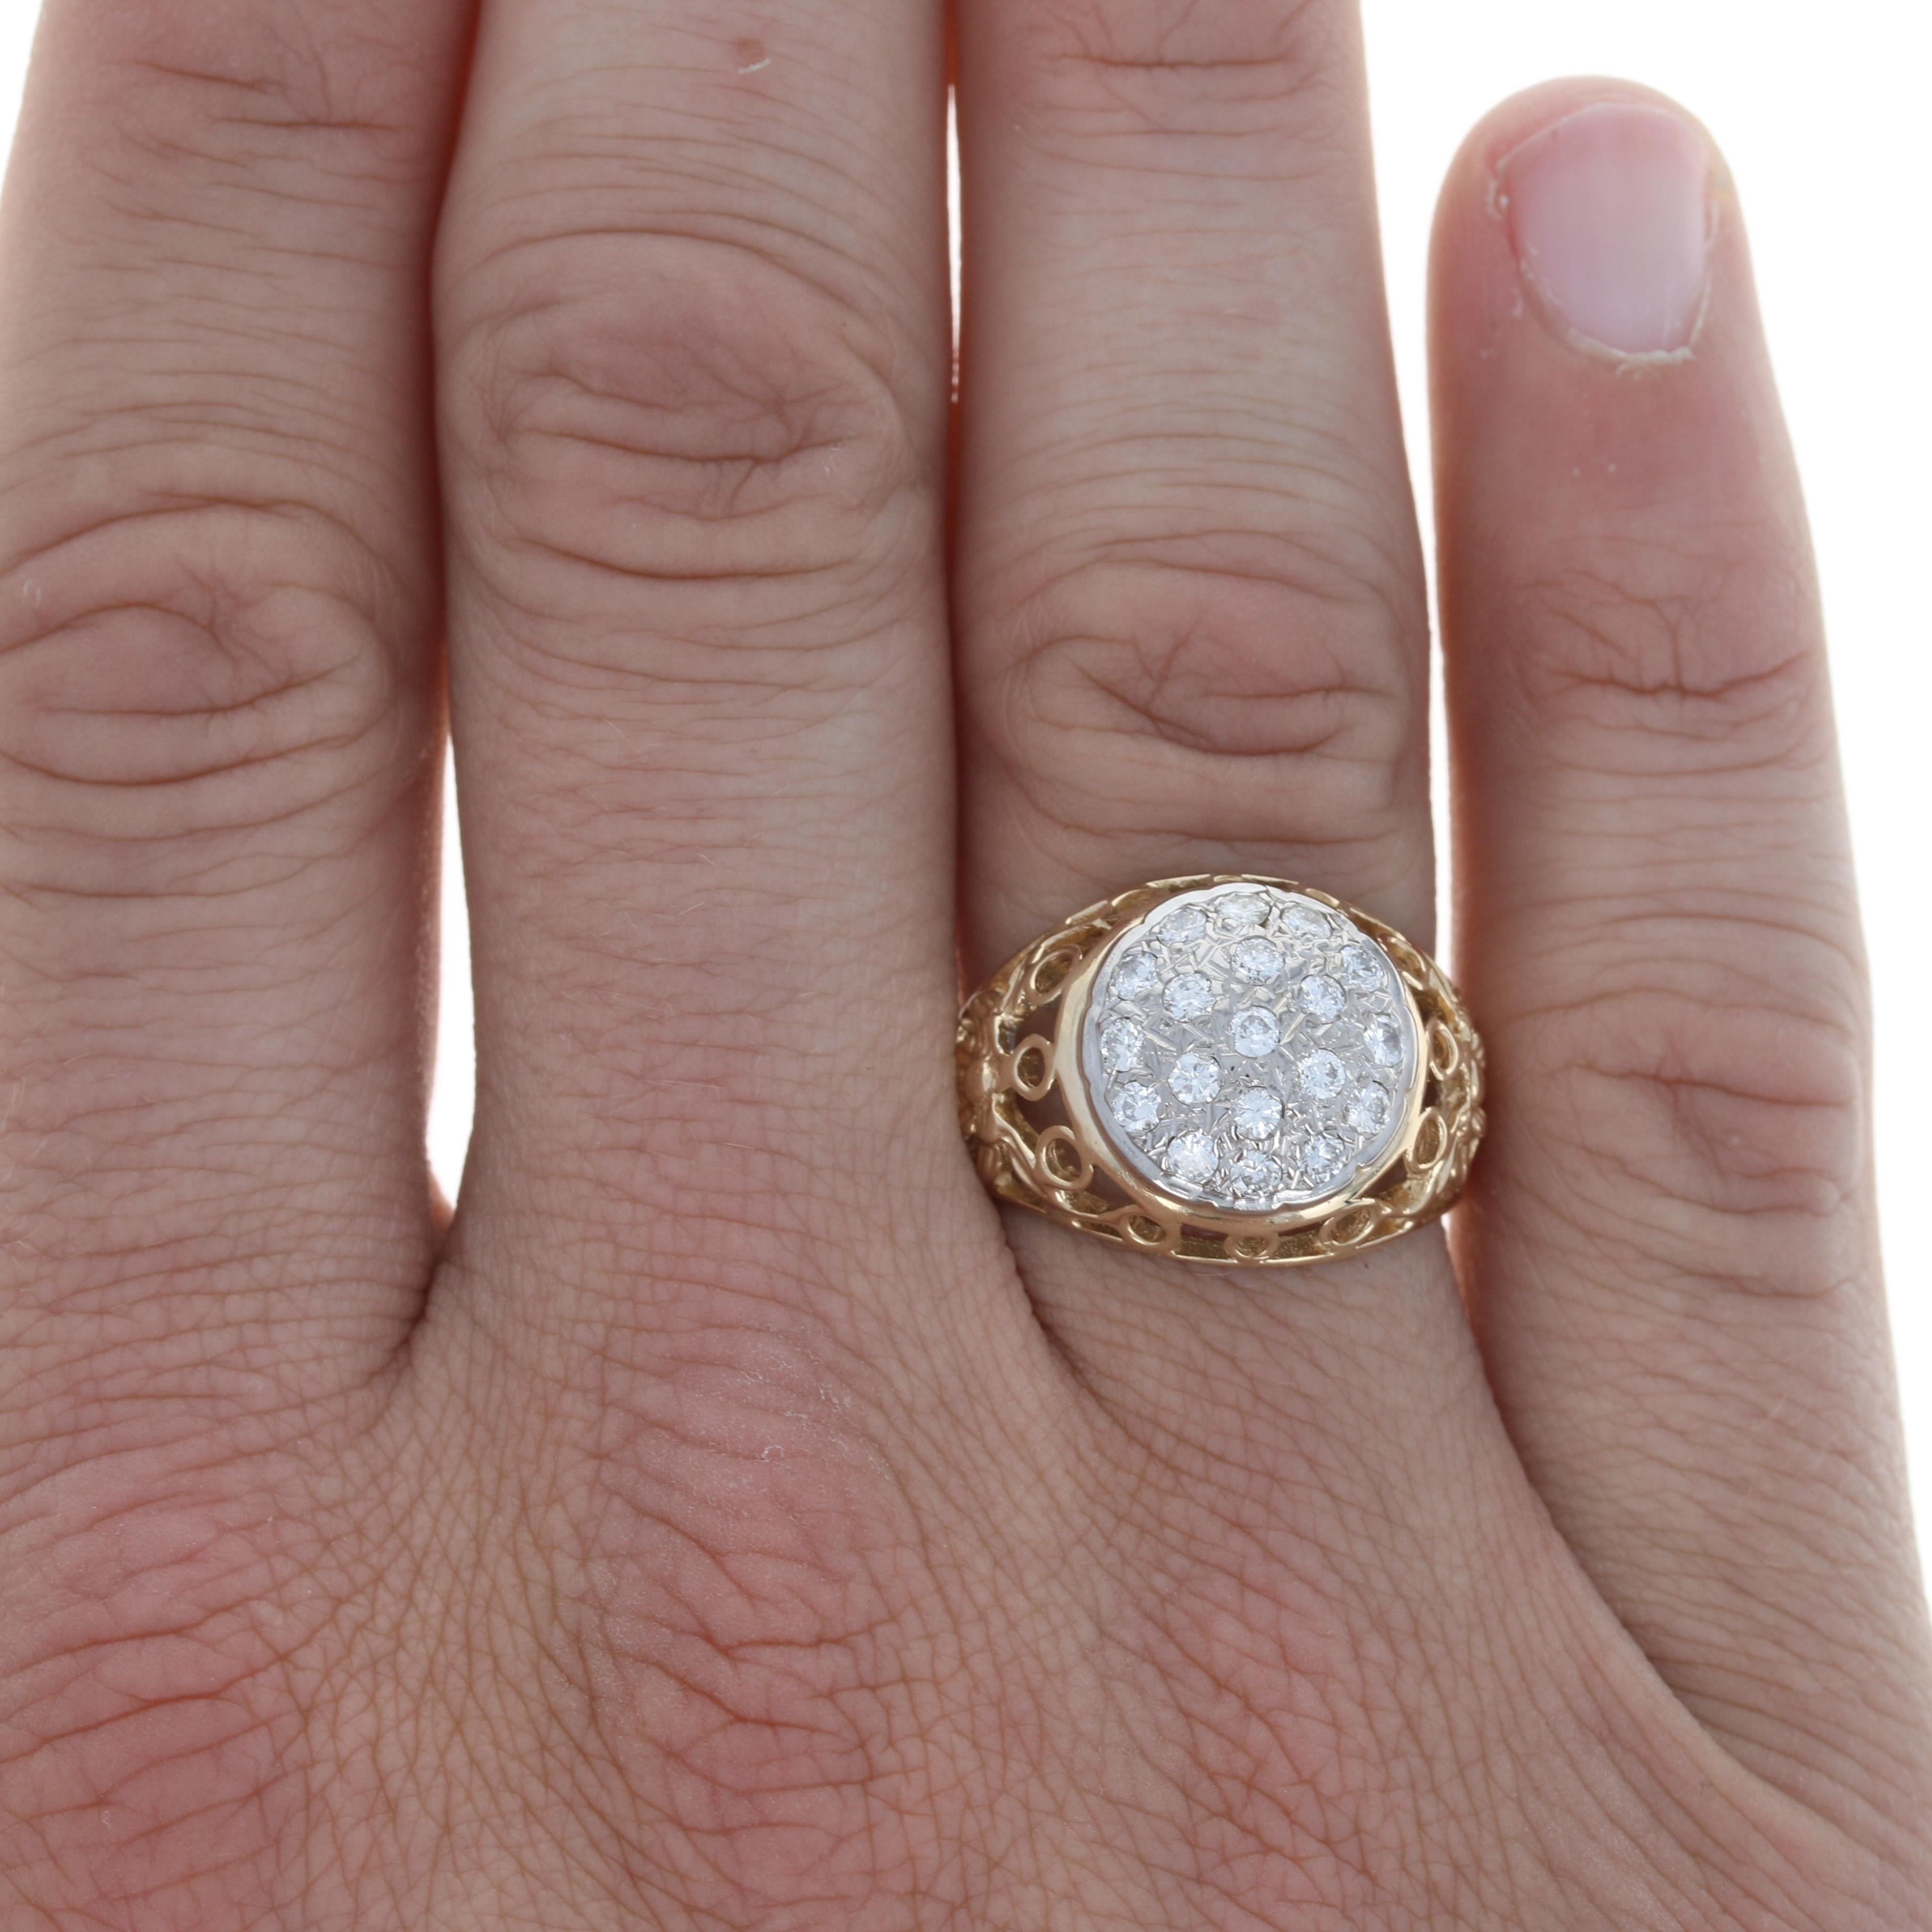 Size: 10 1/2
Sizing Fee: Down 3 Sizes for $30 or Up 2 Sizes for $35

Metal Content: 14k Yellow Gold & 14k White Gold

Stone Information: 
Natural Diamonds
Total Carats: 1.00ctw
Cut: Round Brilliant
Color: F - G
Clarity: SI2 - I1

Style: